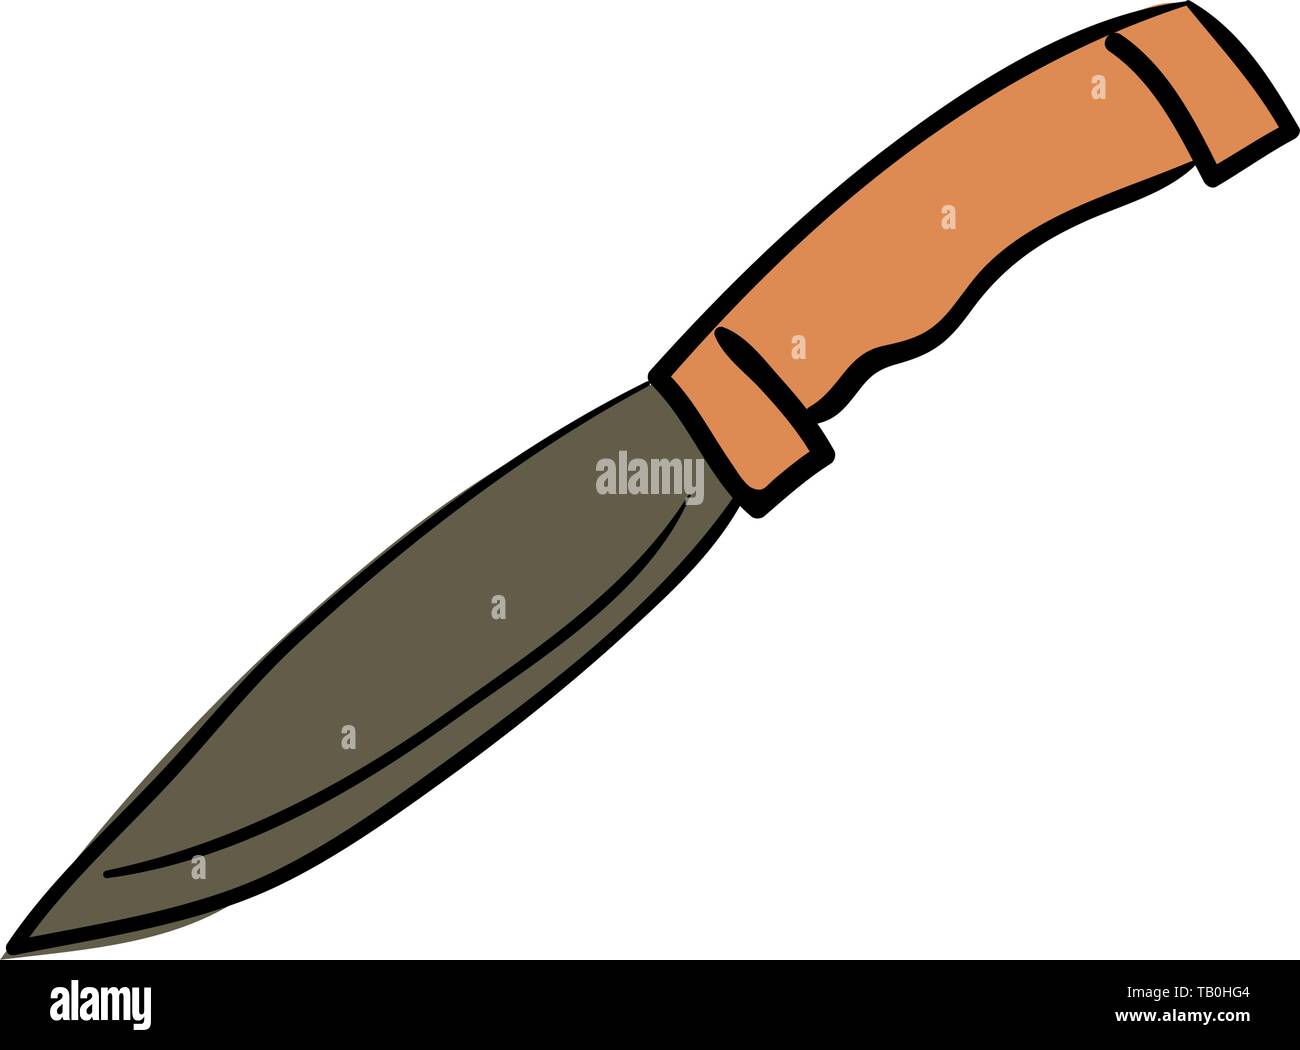 Big kitchen knife stock vector. Illustration of isolated - 154740676